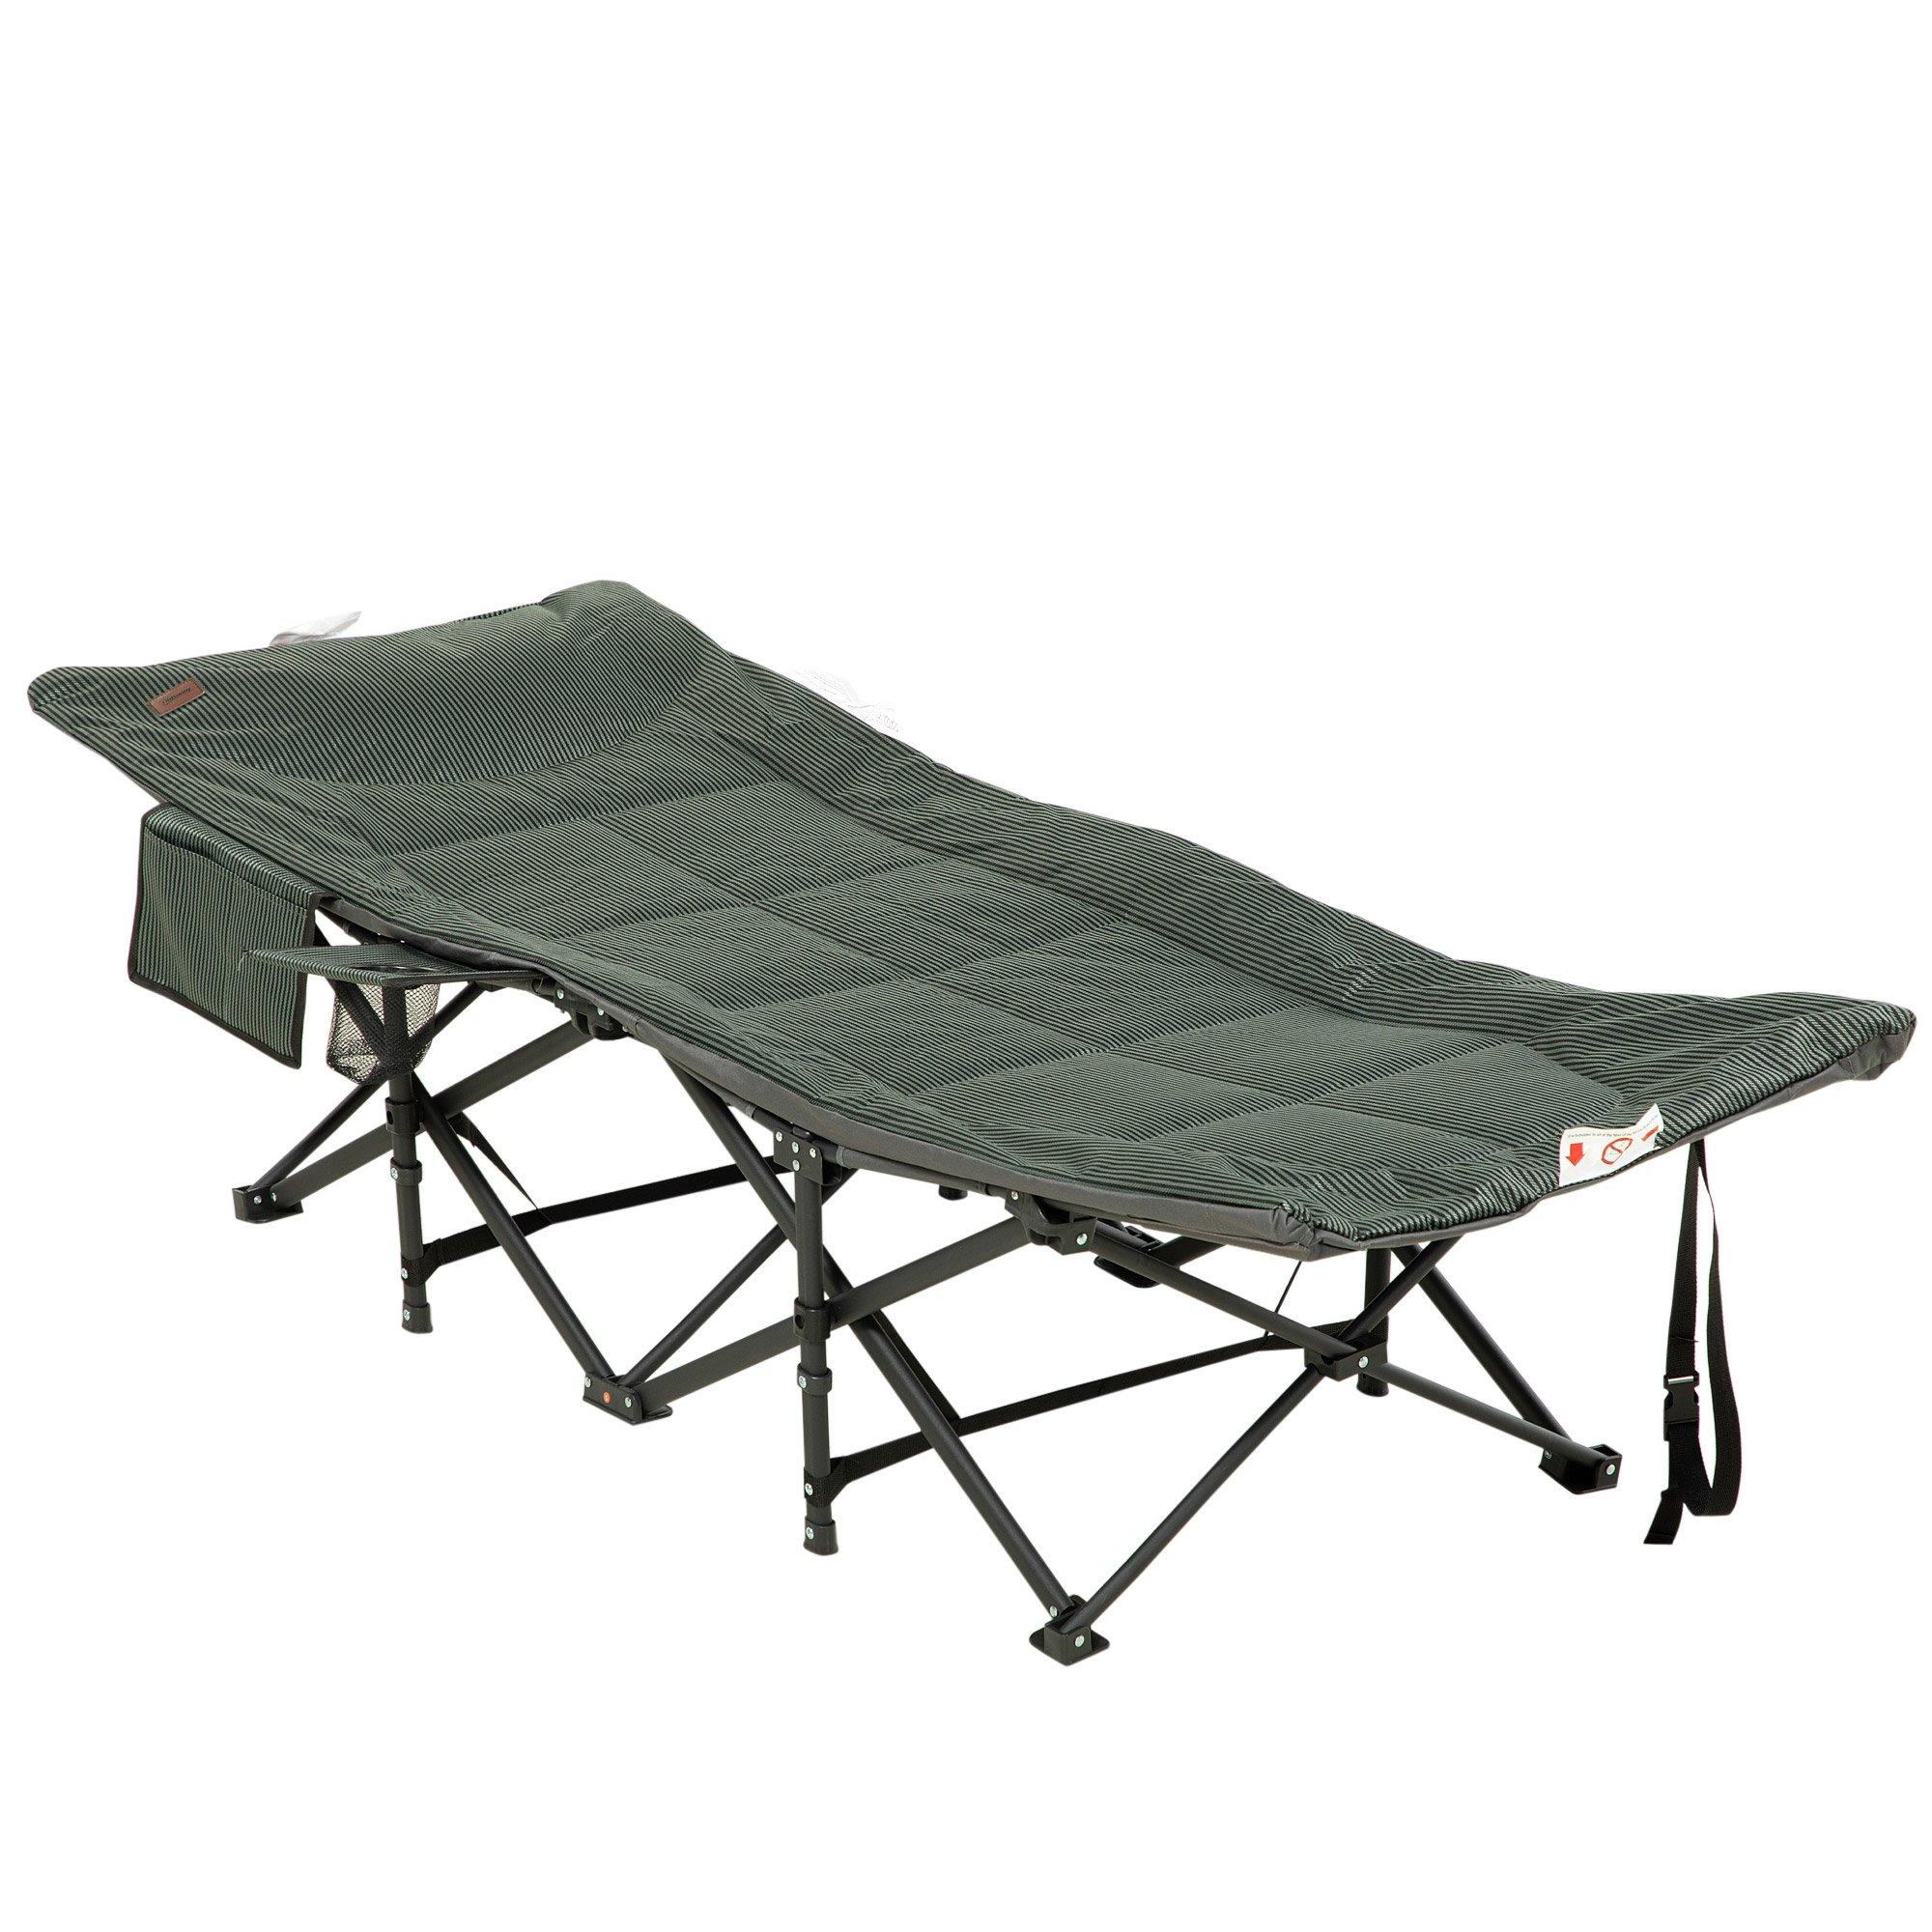 Foldable Camping Bed with Soft Padding, Carry Bag, Magazine Bag, Cup Holder